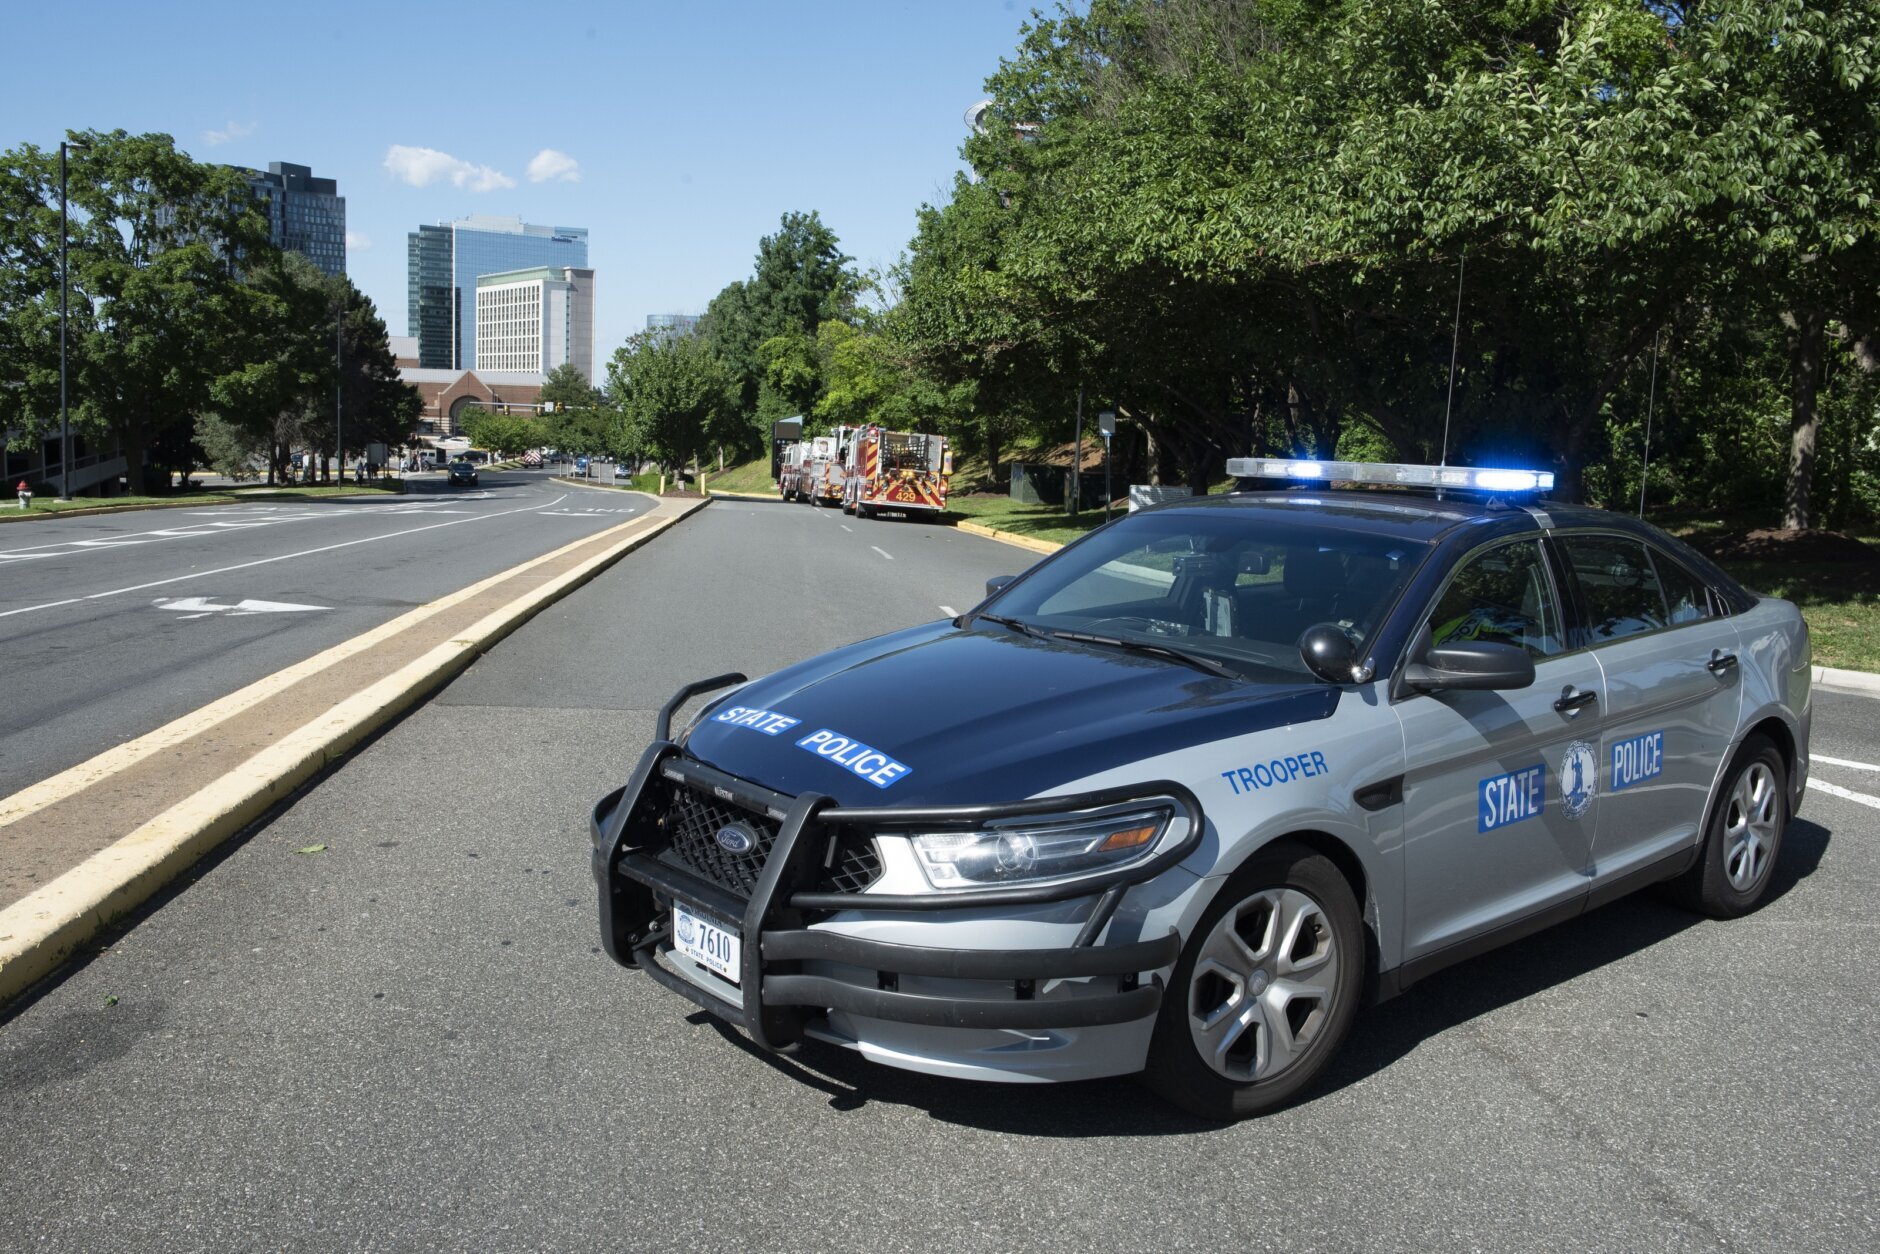 A Virginia State Police officer blocks the entrance to the Tysons Corner Center mall following a shooting inside the shopping center, in Tysons Corner, Va., Saturday, June 18, 2022. (AP Photo/Cliff Owen)